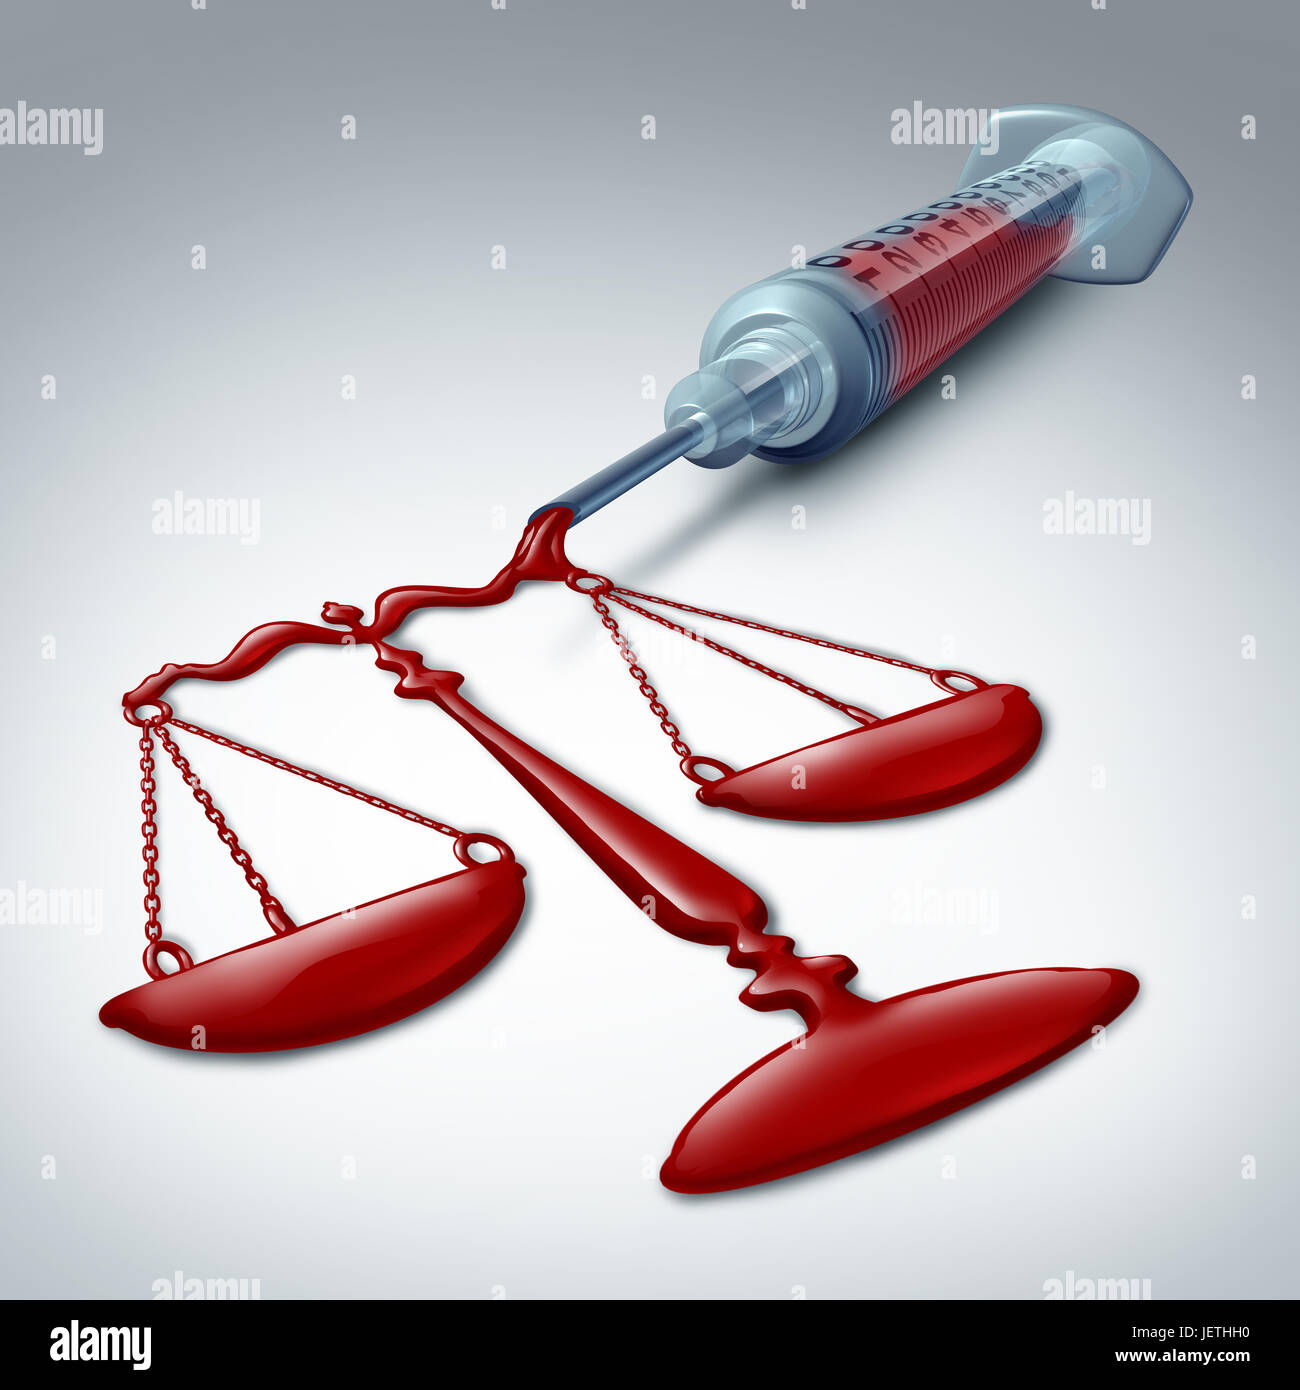 Medical law concept as a medicine symbol for malpractice or patient rights and a symbol for a hospital lawyer as a 3D illustration. Stock Photo